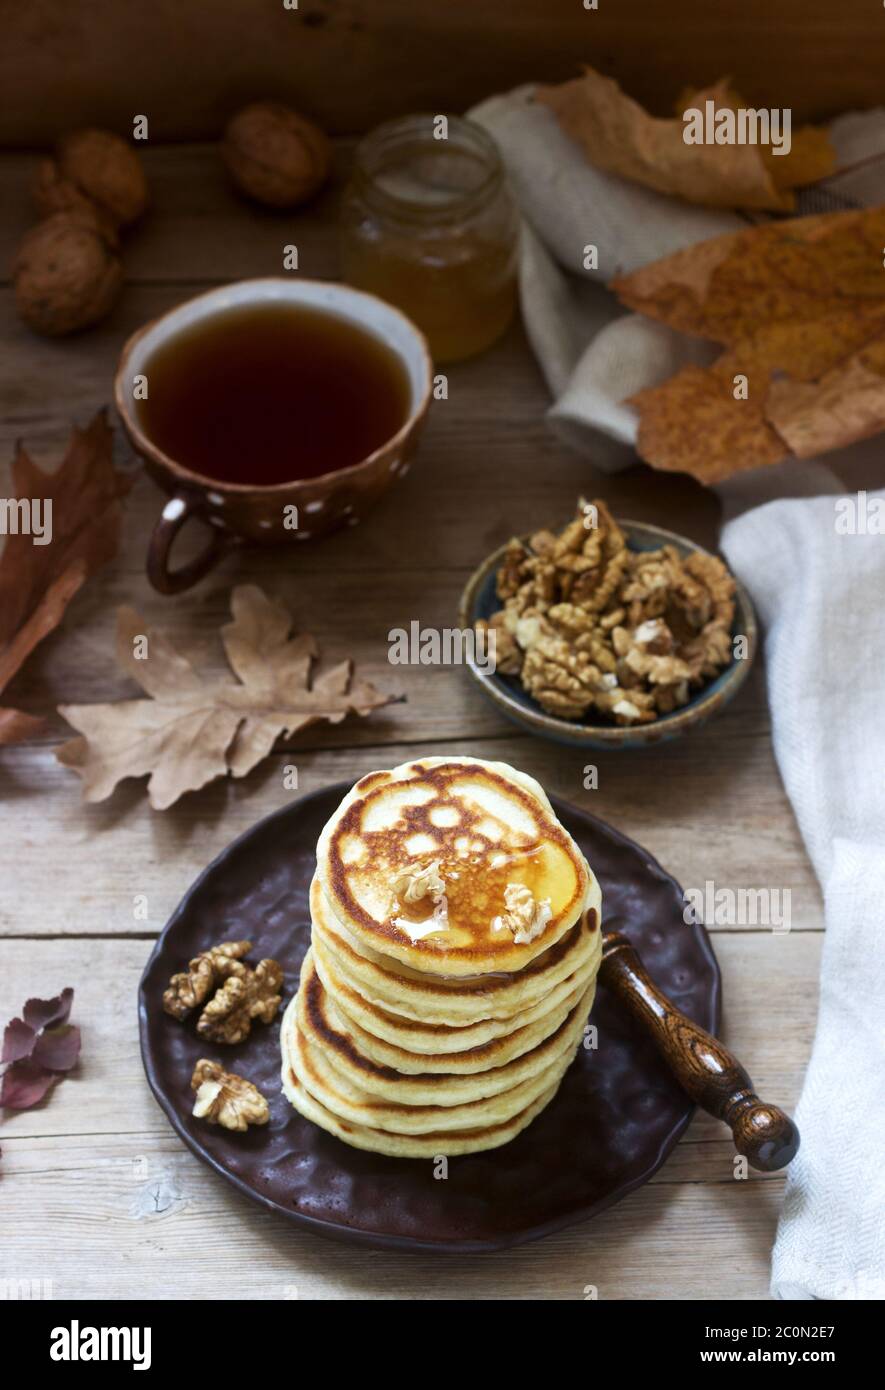 Vegetarian breakfast of fritters with honey, nuts and tea. Autumn still life. Stock Photo